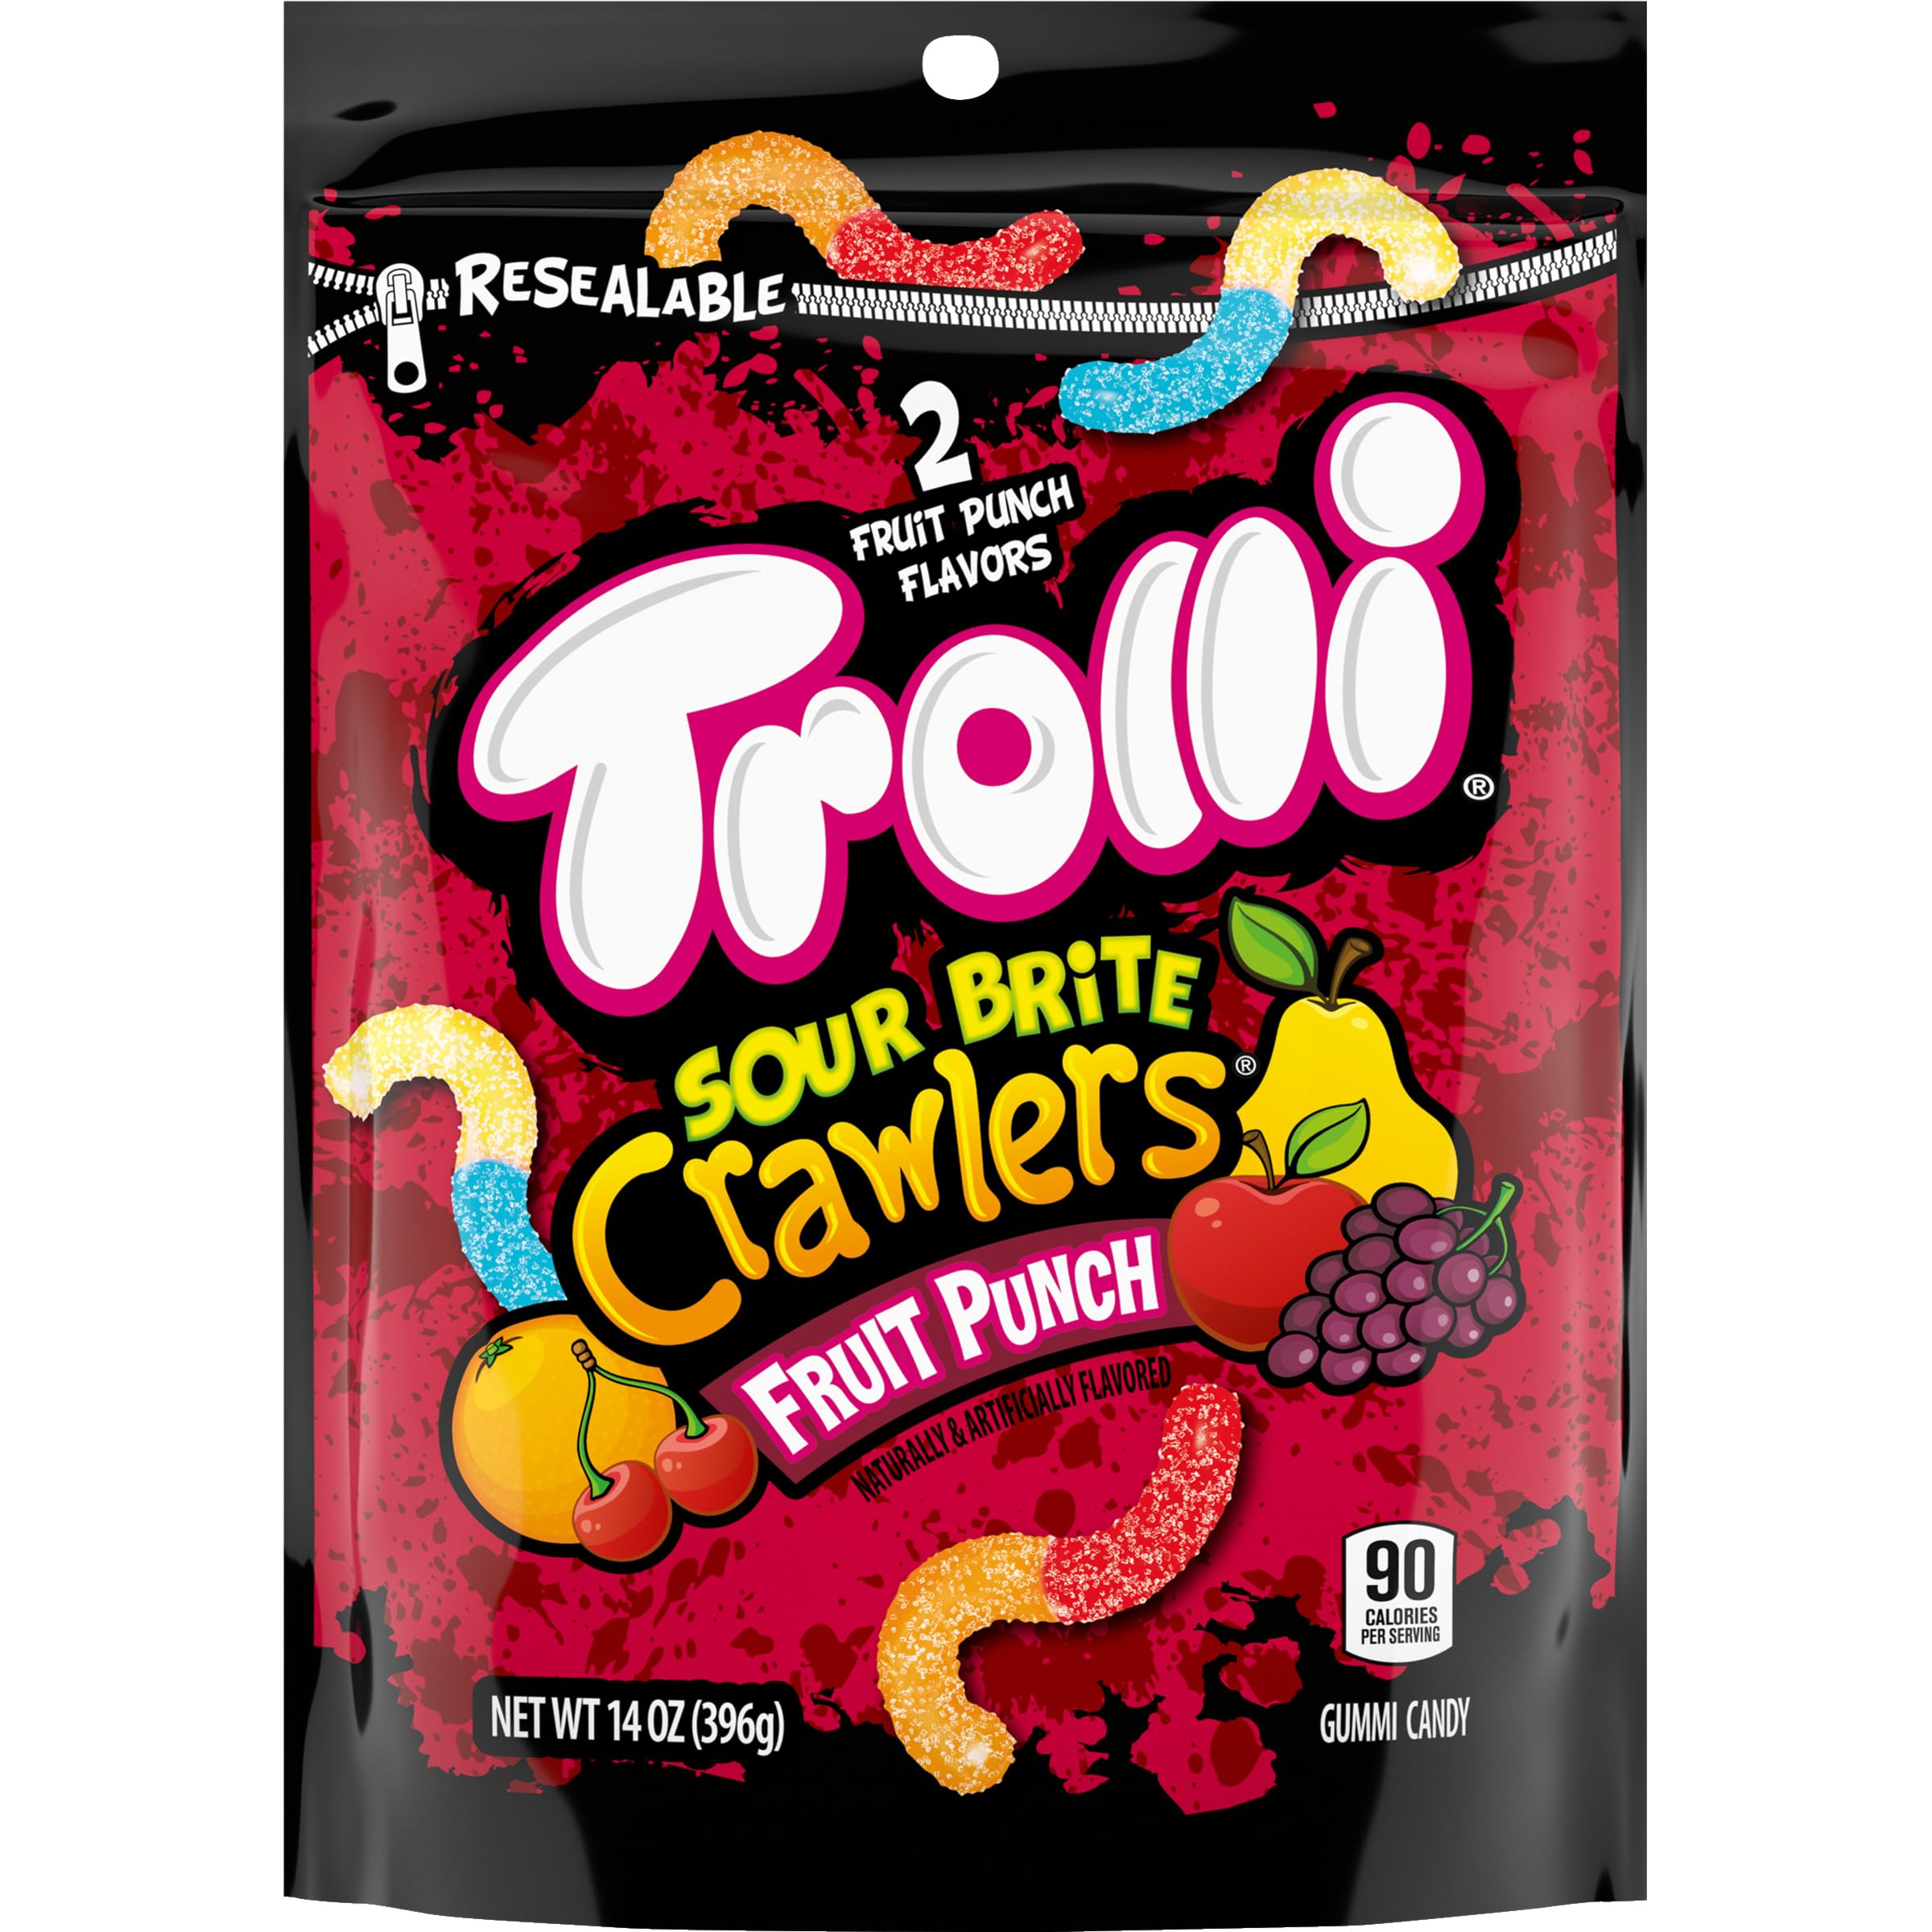 14-Oz Trolli Sour Brite Crawlers Candy Sour Gummy Worms (Fruit Punch) $2.23 + Free Shipping w/ Prime or on $35+